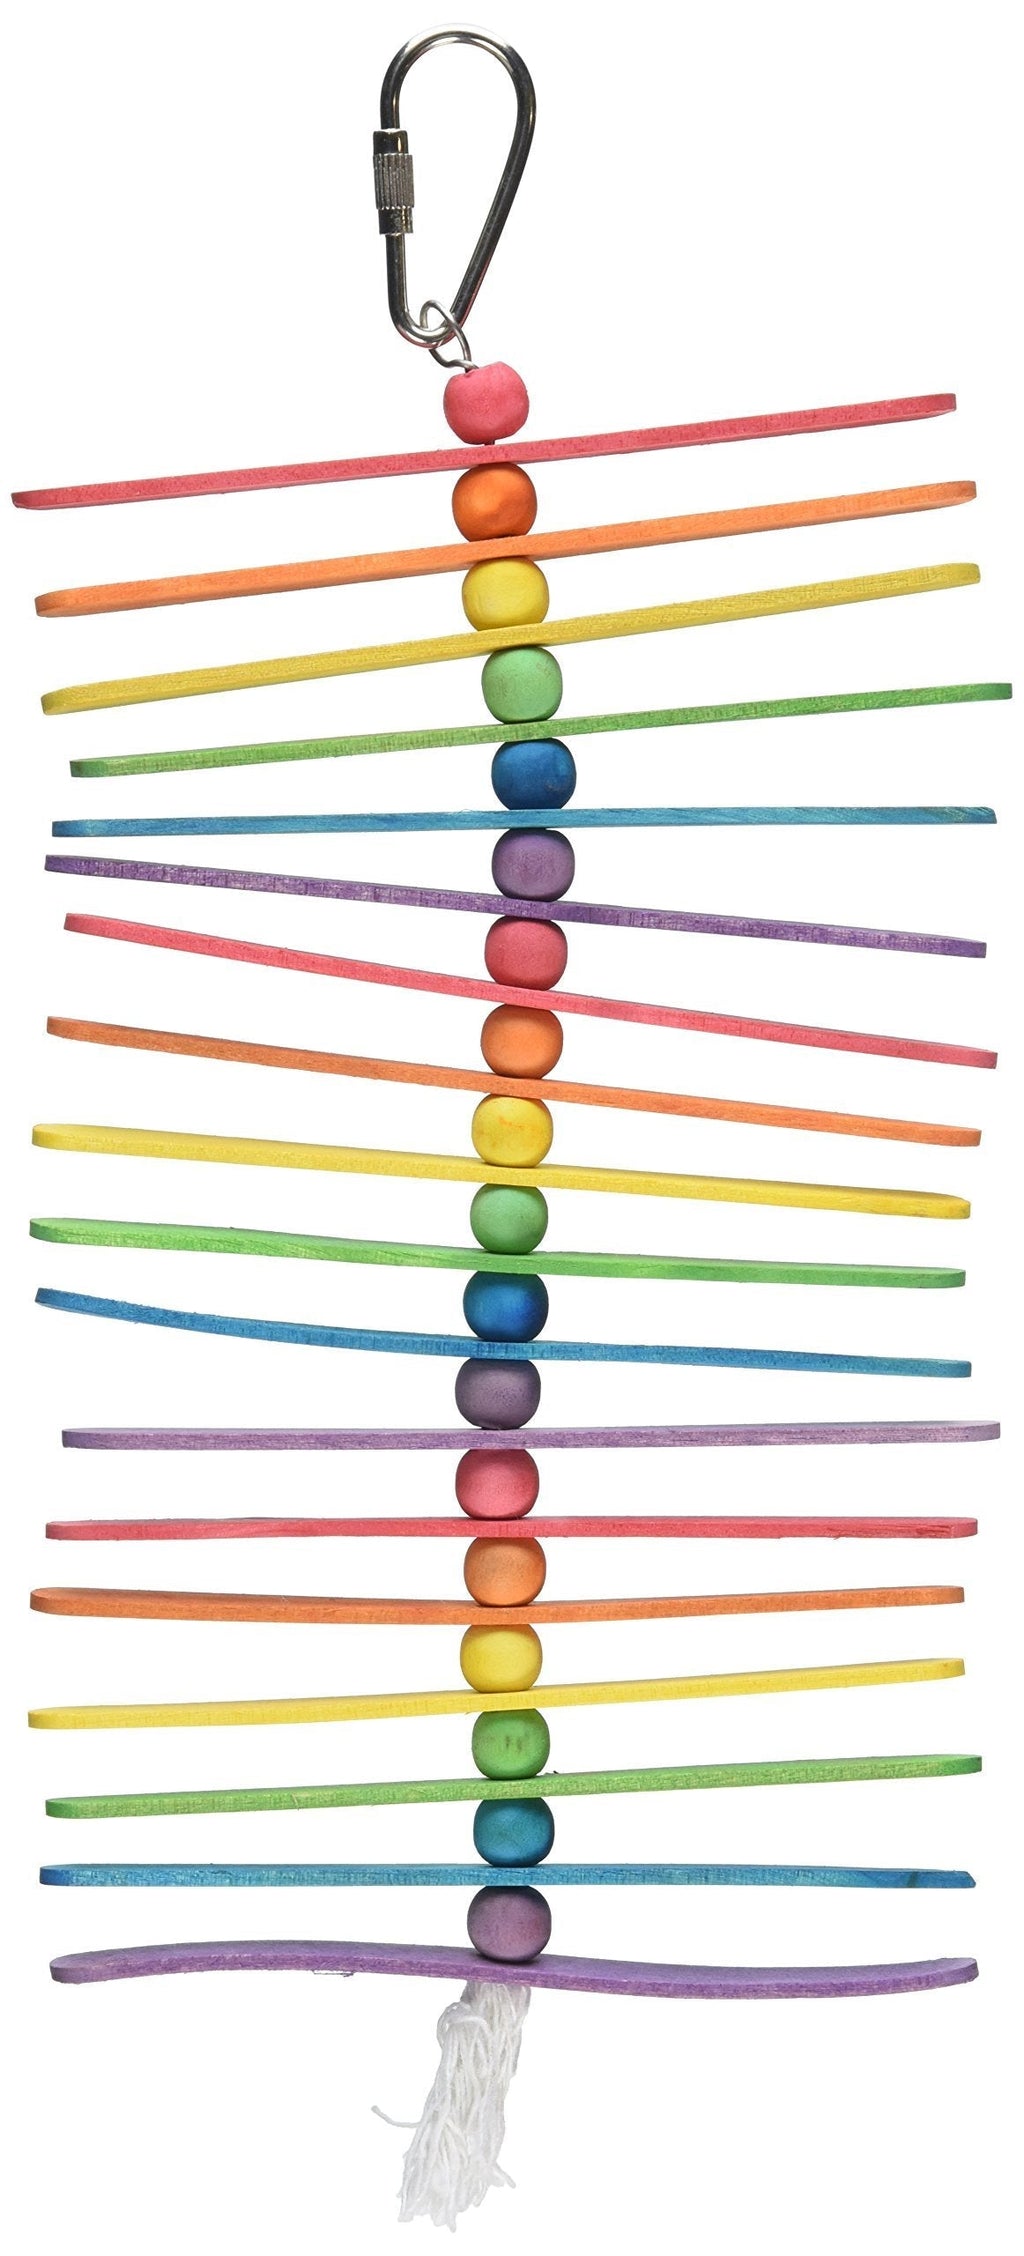 [Australia] - Featherland Paradise, Colorful Popsicle Sticks & Beads Pet Bird Toy, Bright Colors, Great for Chewing Helicoptor Sticks & Beads (Rainbow) 